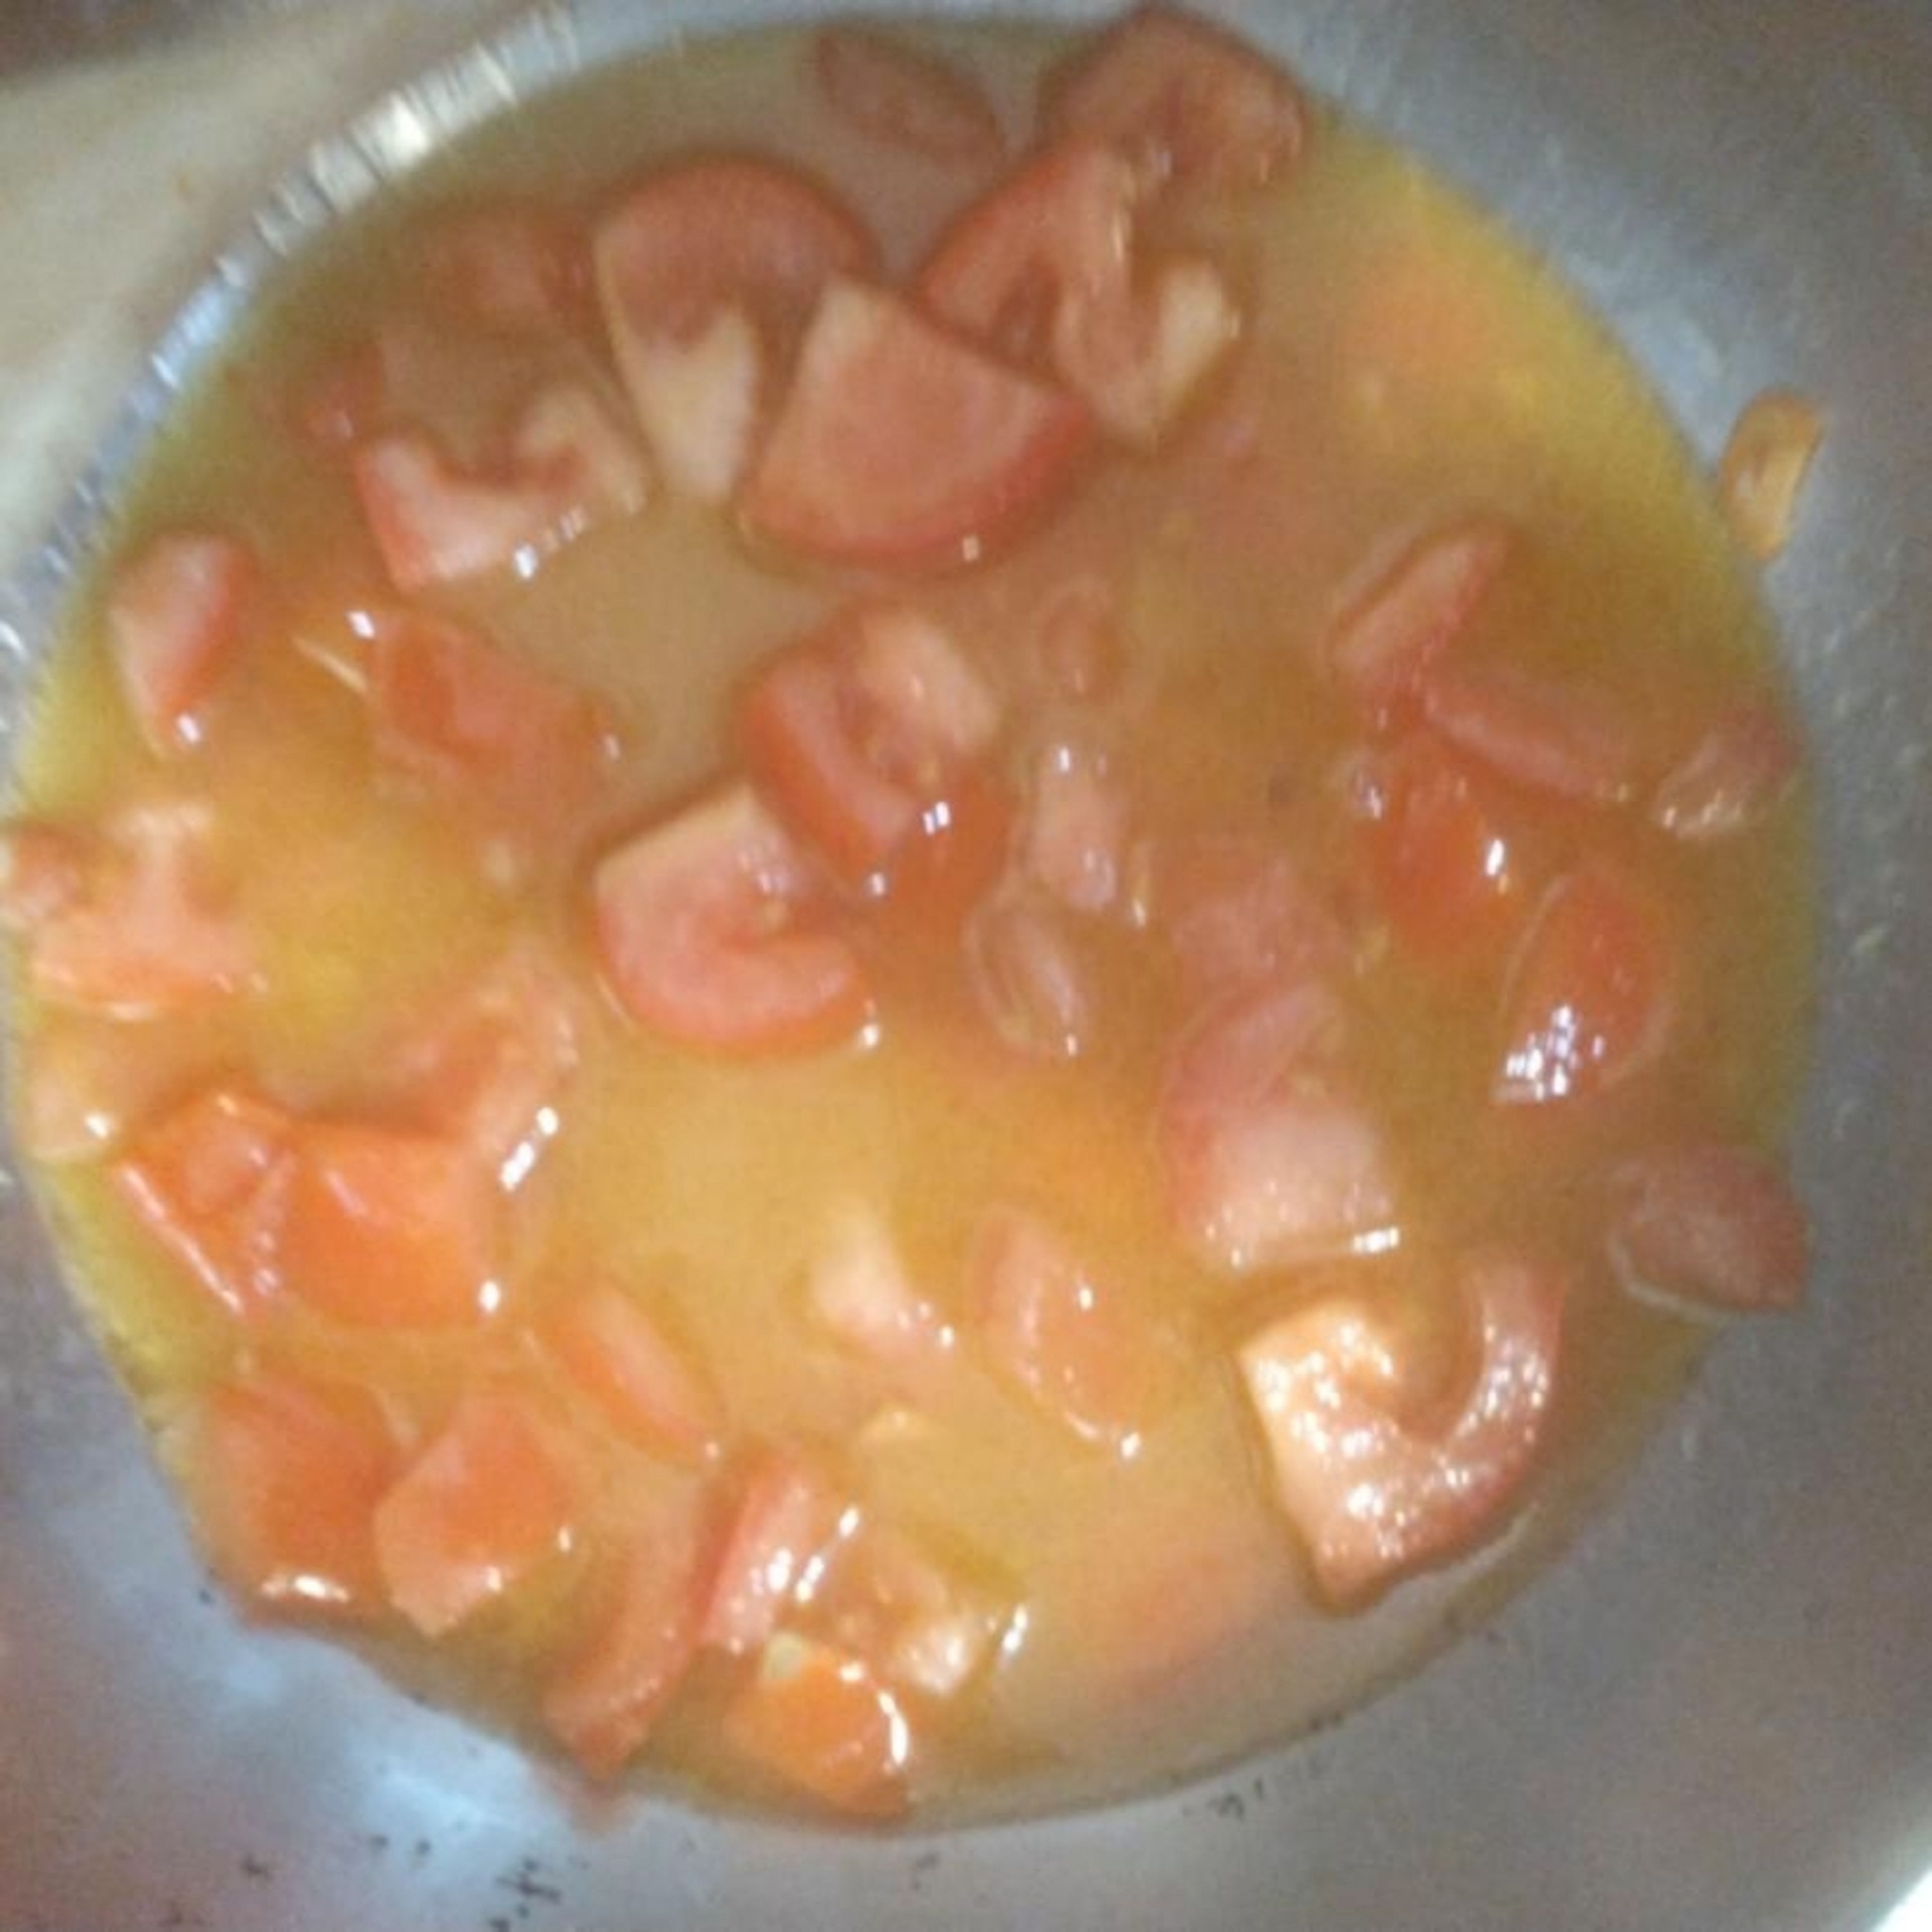 Meanwhile, preheat the oven to gas 9, and place a baking tray in the oven. Get on with sauce. Dice the tomatoes, and roughly slice the garlic. Fry the garlic in a. preheated pan with olive oil for about 2 mins until golden brown over a medium heat. Add the tomatoes, and 2 generous splashes of water, and let simmer until reduced and the tomatoes began to break down. Add some seasoning, garlic granules, and any dried italian herb you have. Blend the sauce - you can have it smooth, chunky or 50/50.